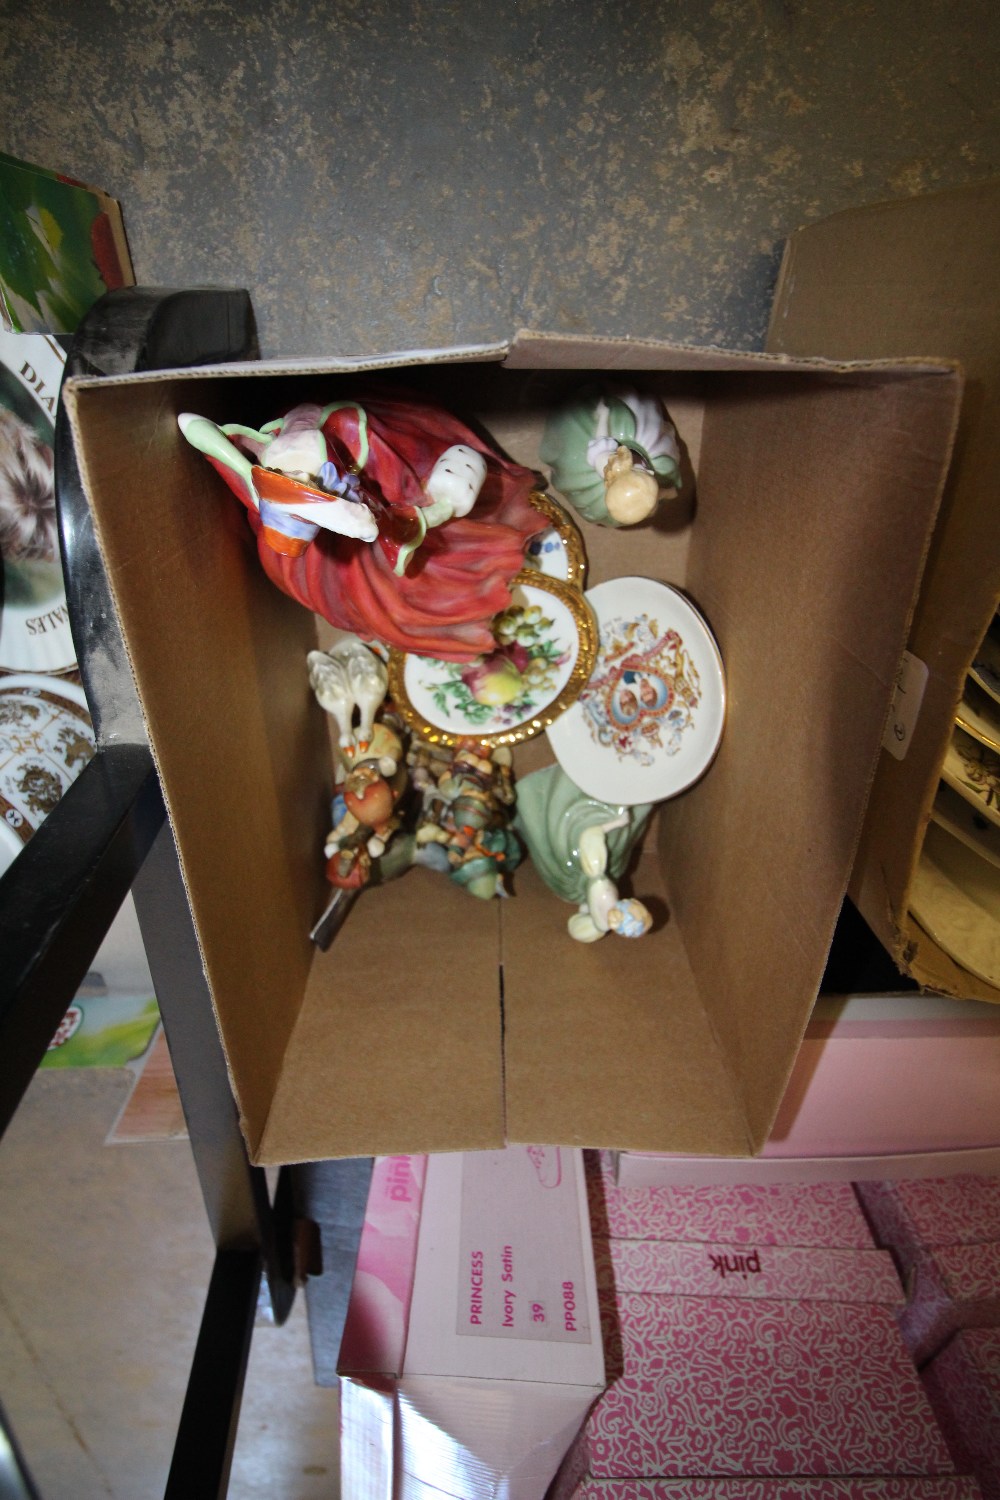 Box of mixed porcelain figures